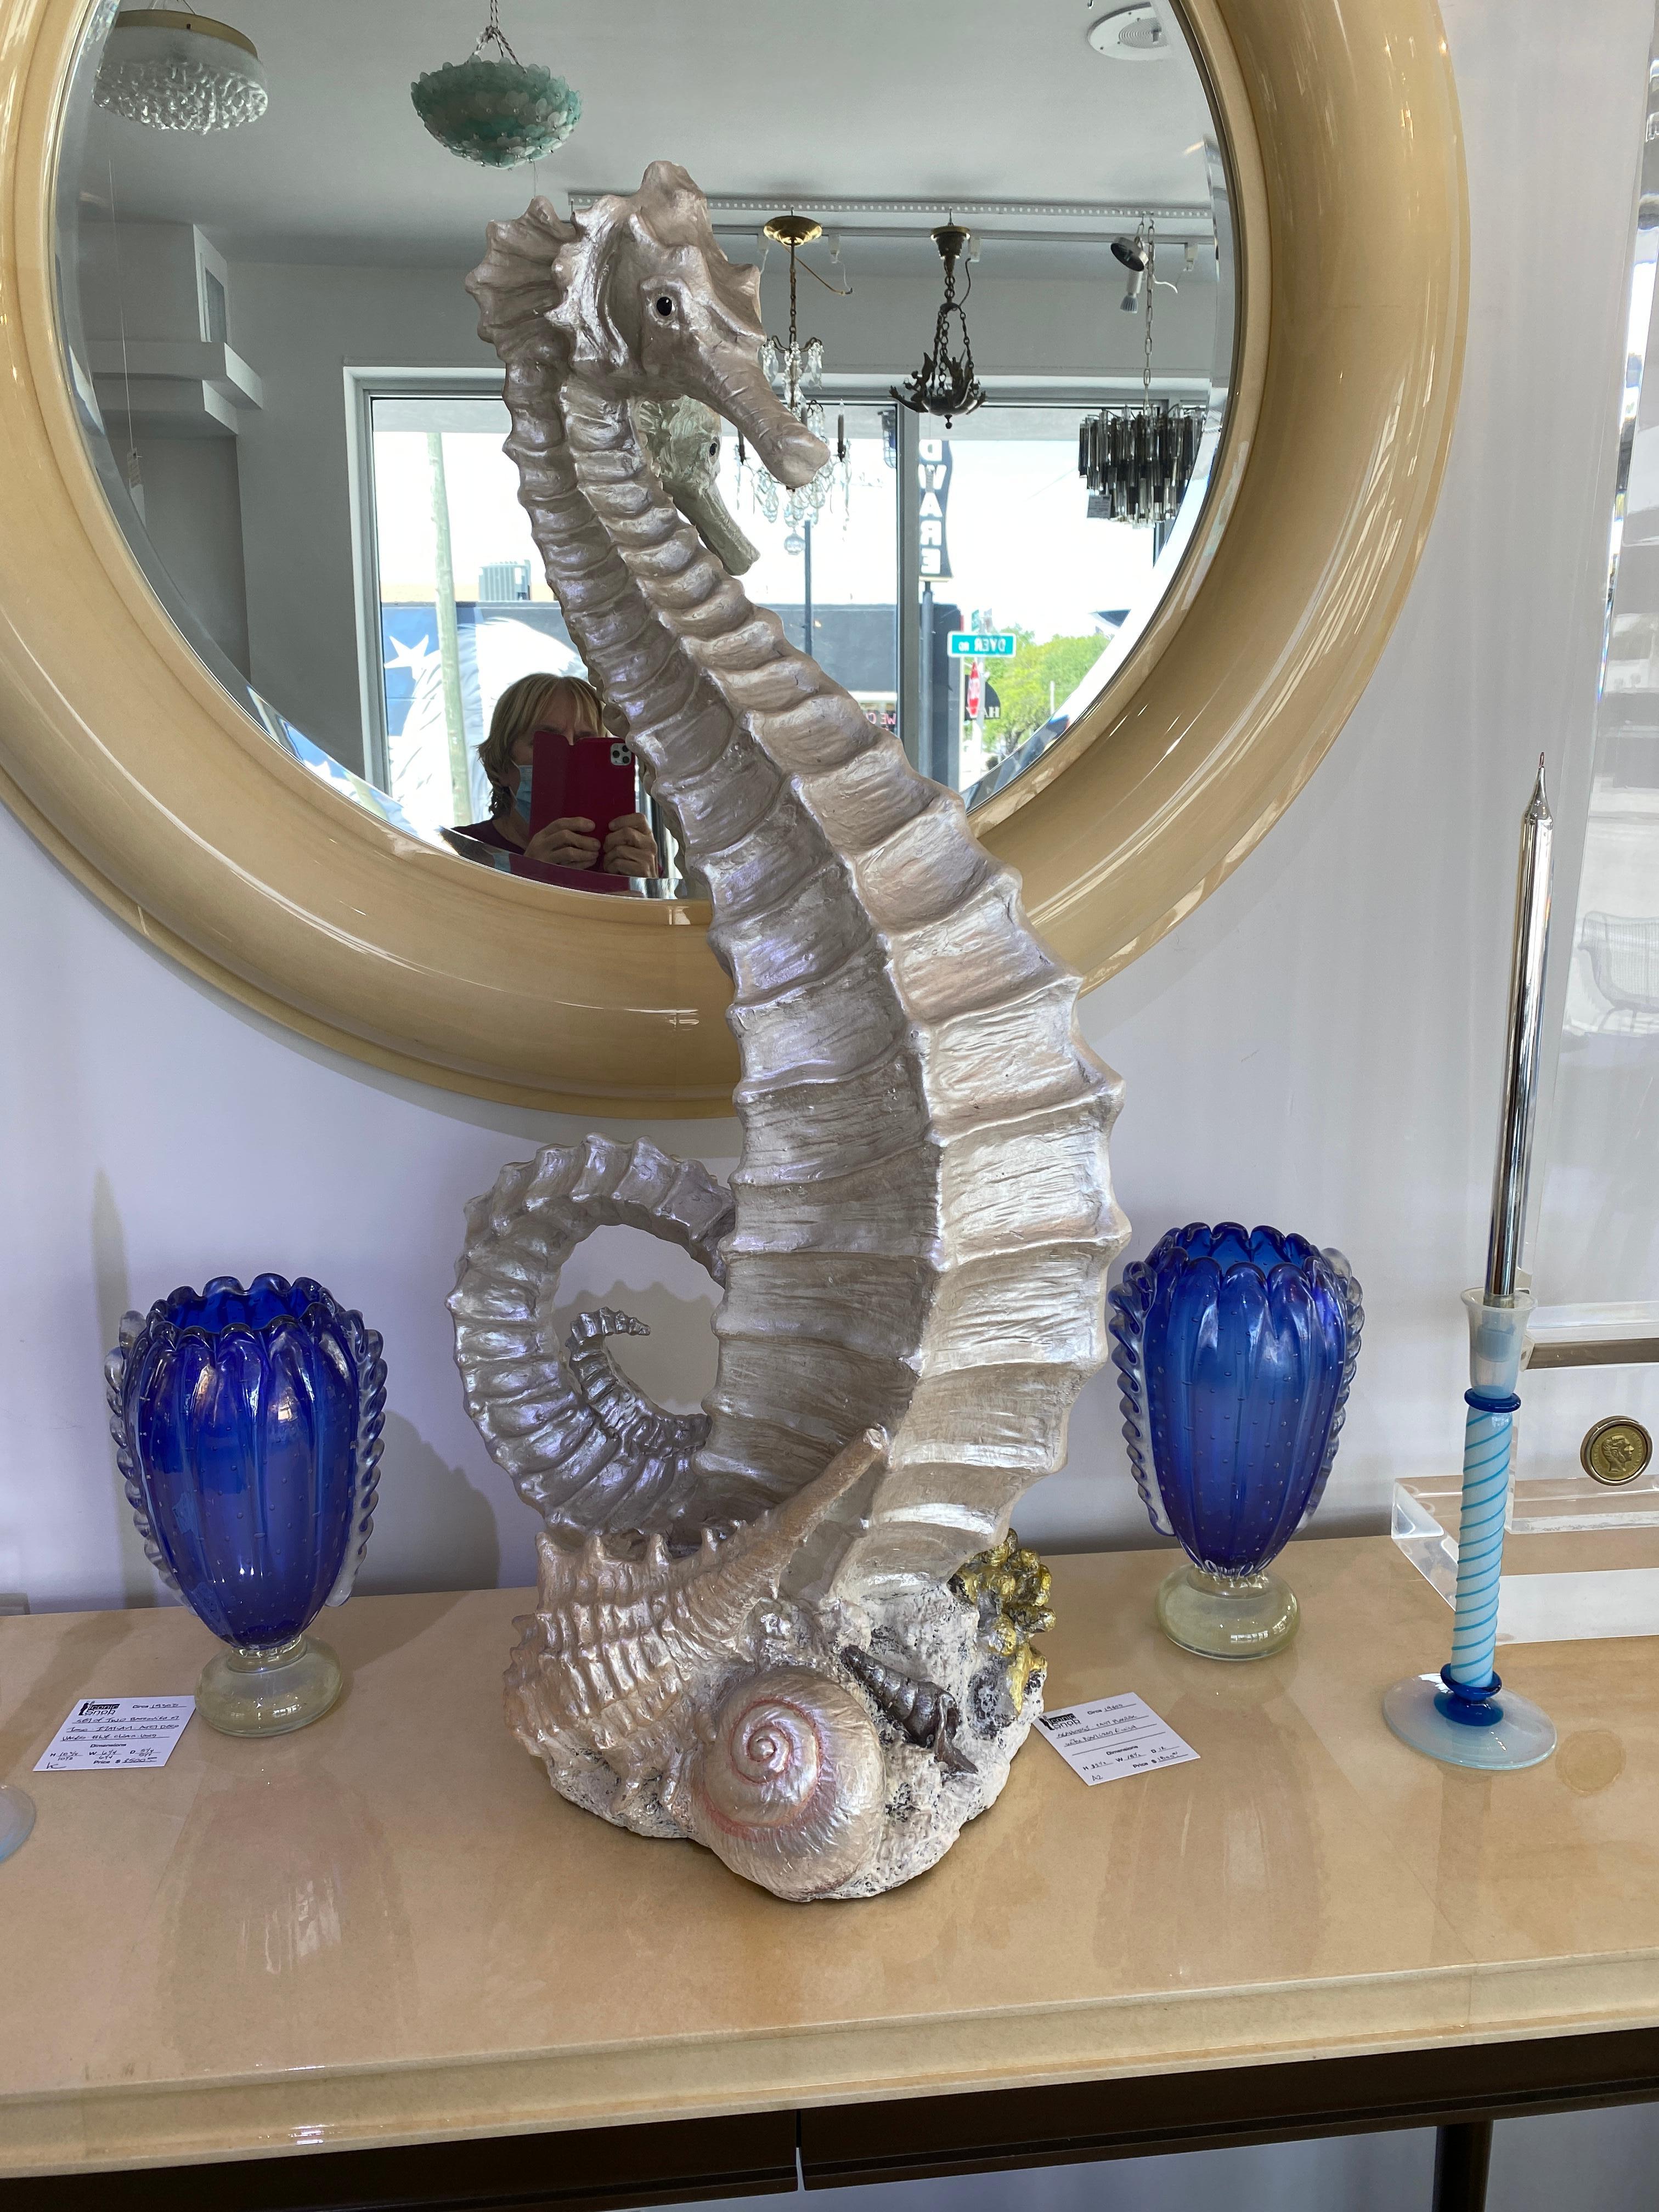 This large scale, chic and stylish piece takes its cue from the Art Deco, Hollywood Regency periods. The piece is cast in plaster and hand painted. The seahorse itself is finished in a pearlized coloration that catches the light beautifully.

